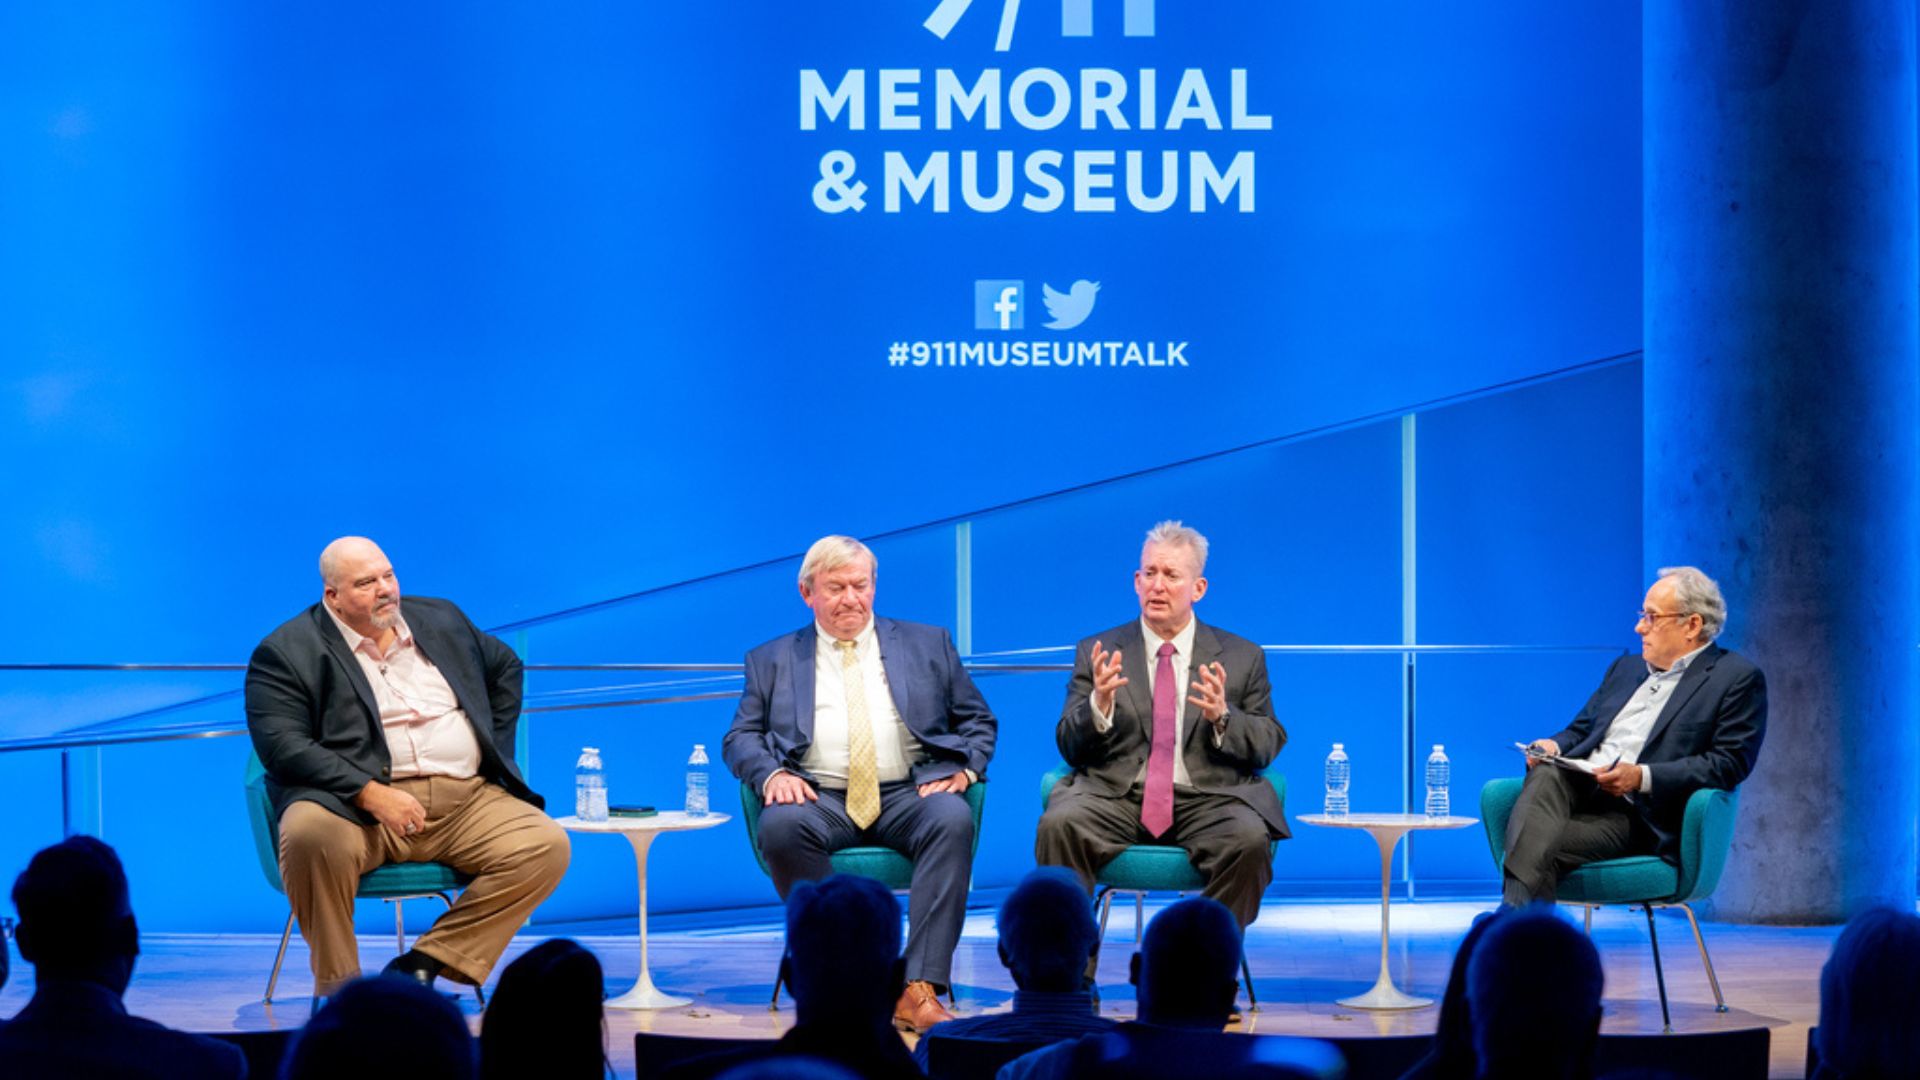 Four men on stage against a bright blue backdrop with the 9/11 Memorial & Museum logo